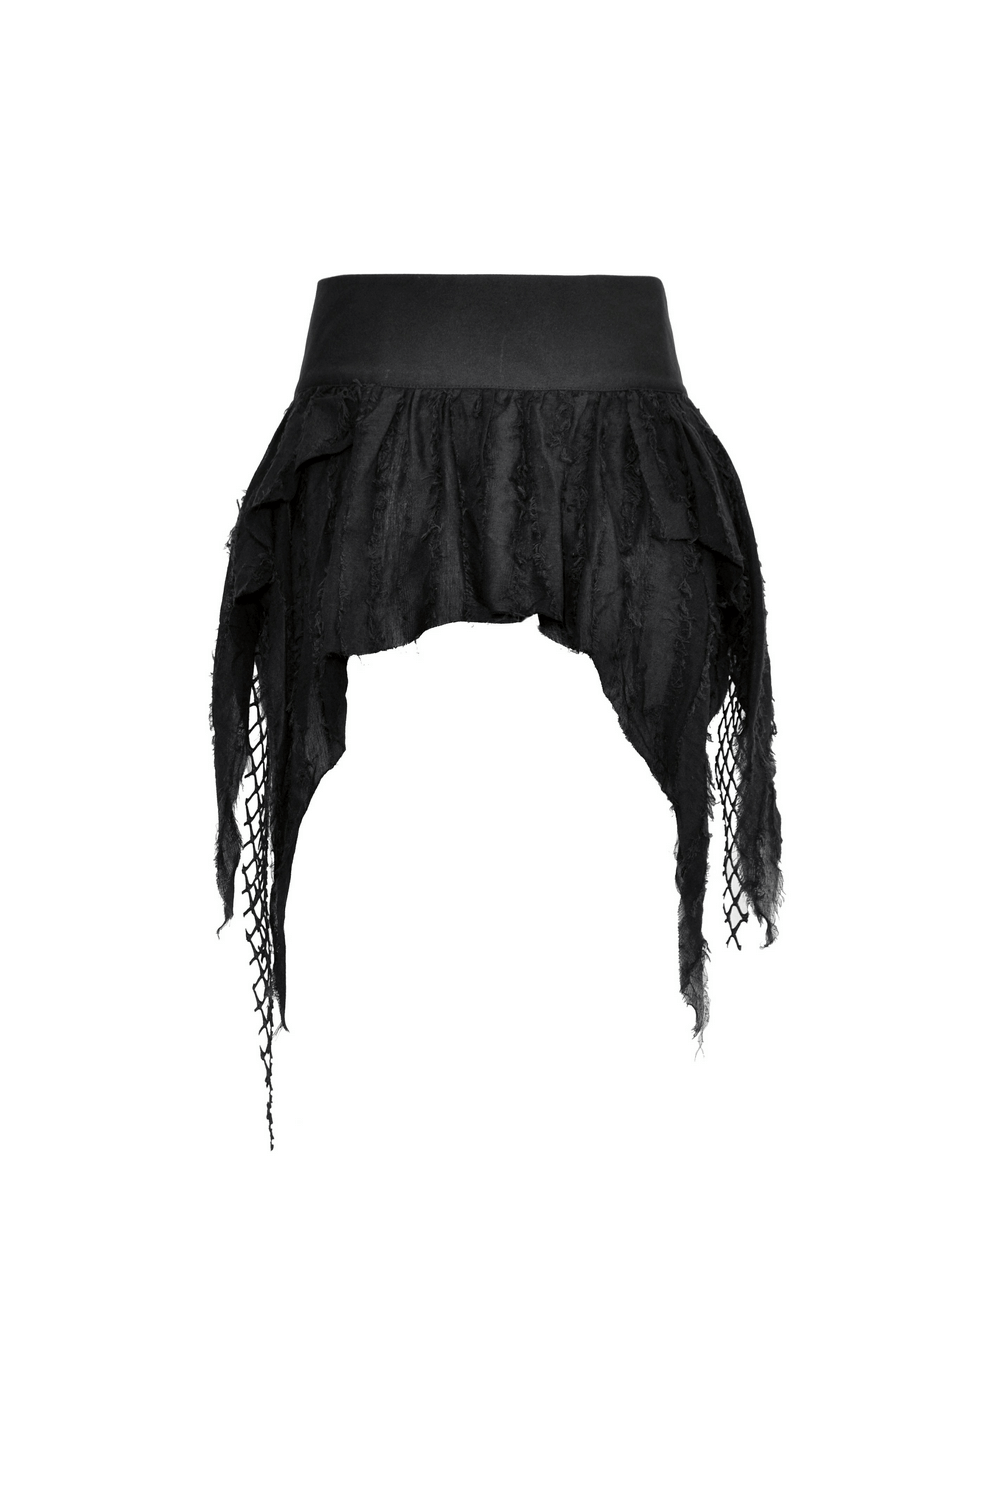 Gothic Punk Mini Skirt with Fishnet and Fringe Accents